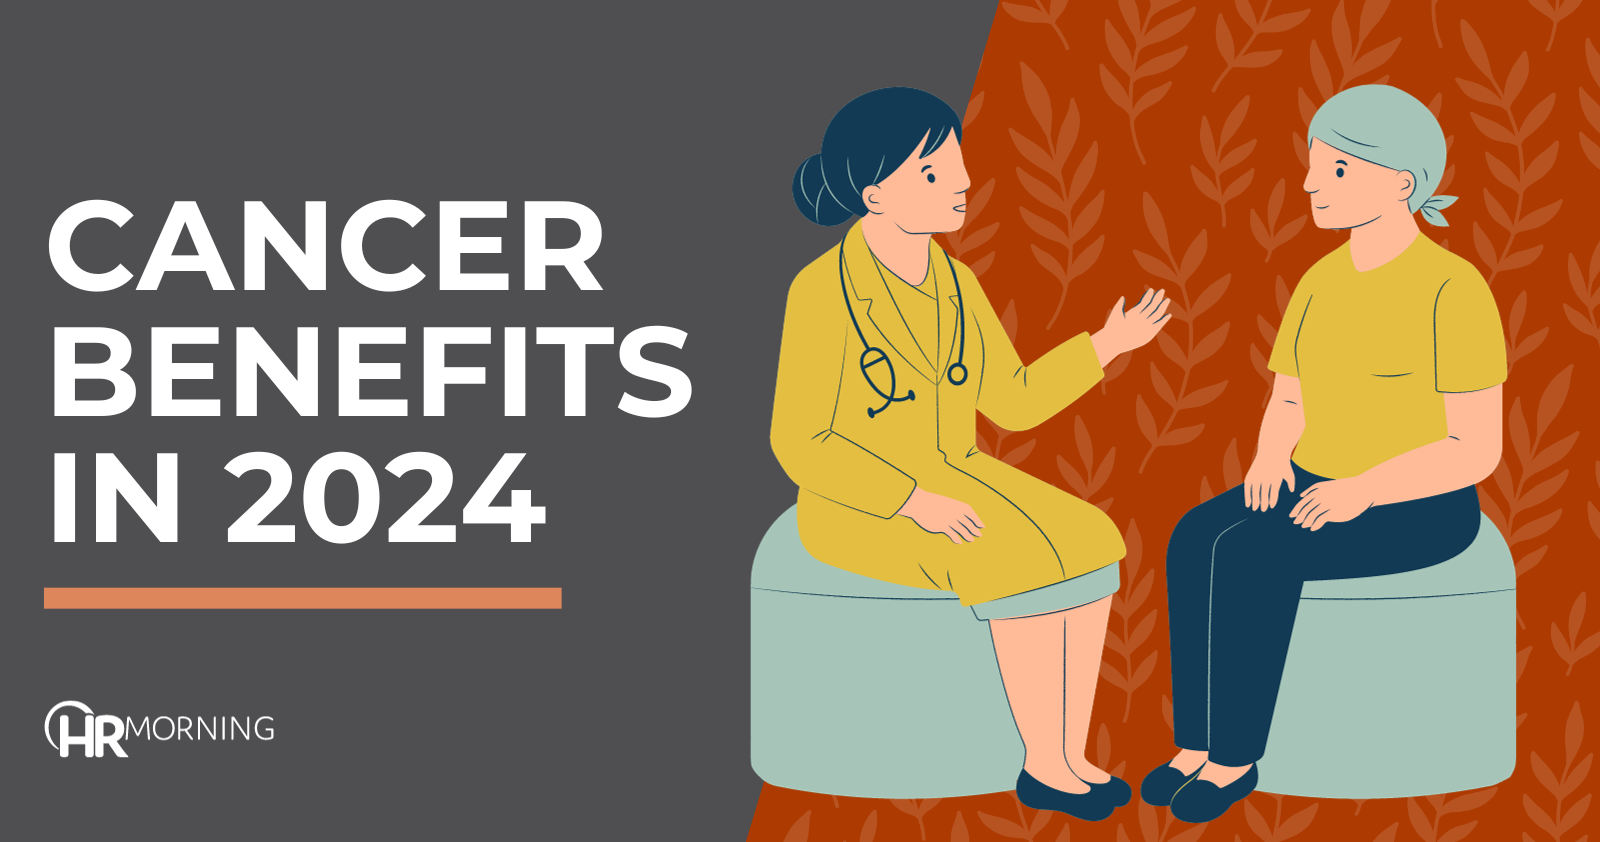 Cancer benefits in 2024